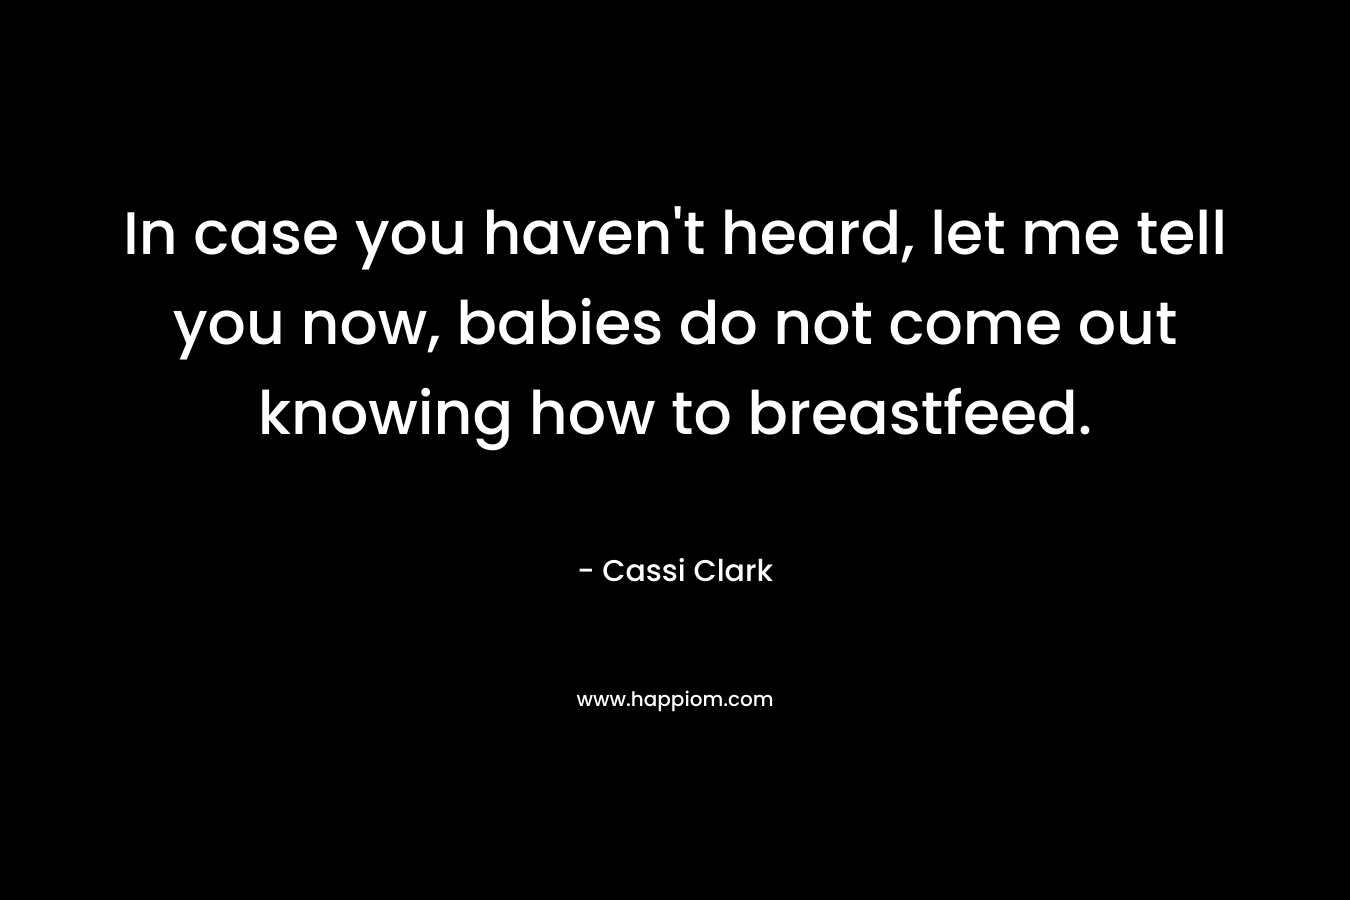 In case you haven’t heard, let me tell you now, babies do not come out knowing how to breastfeed. – Cassi Clark